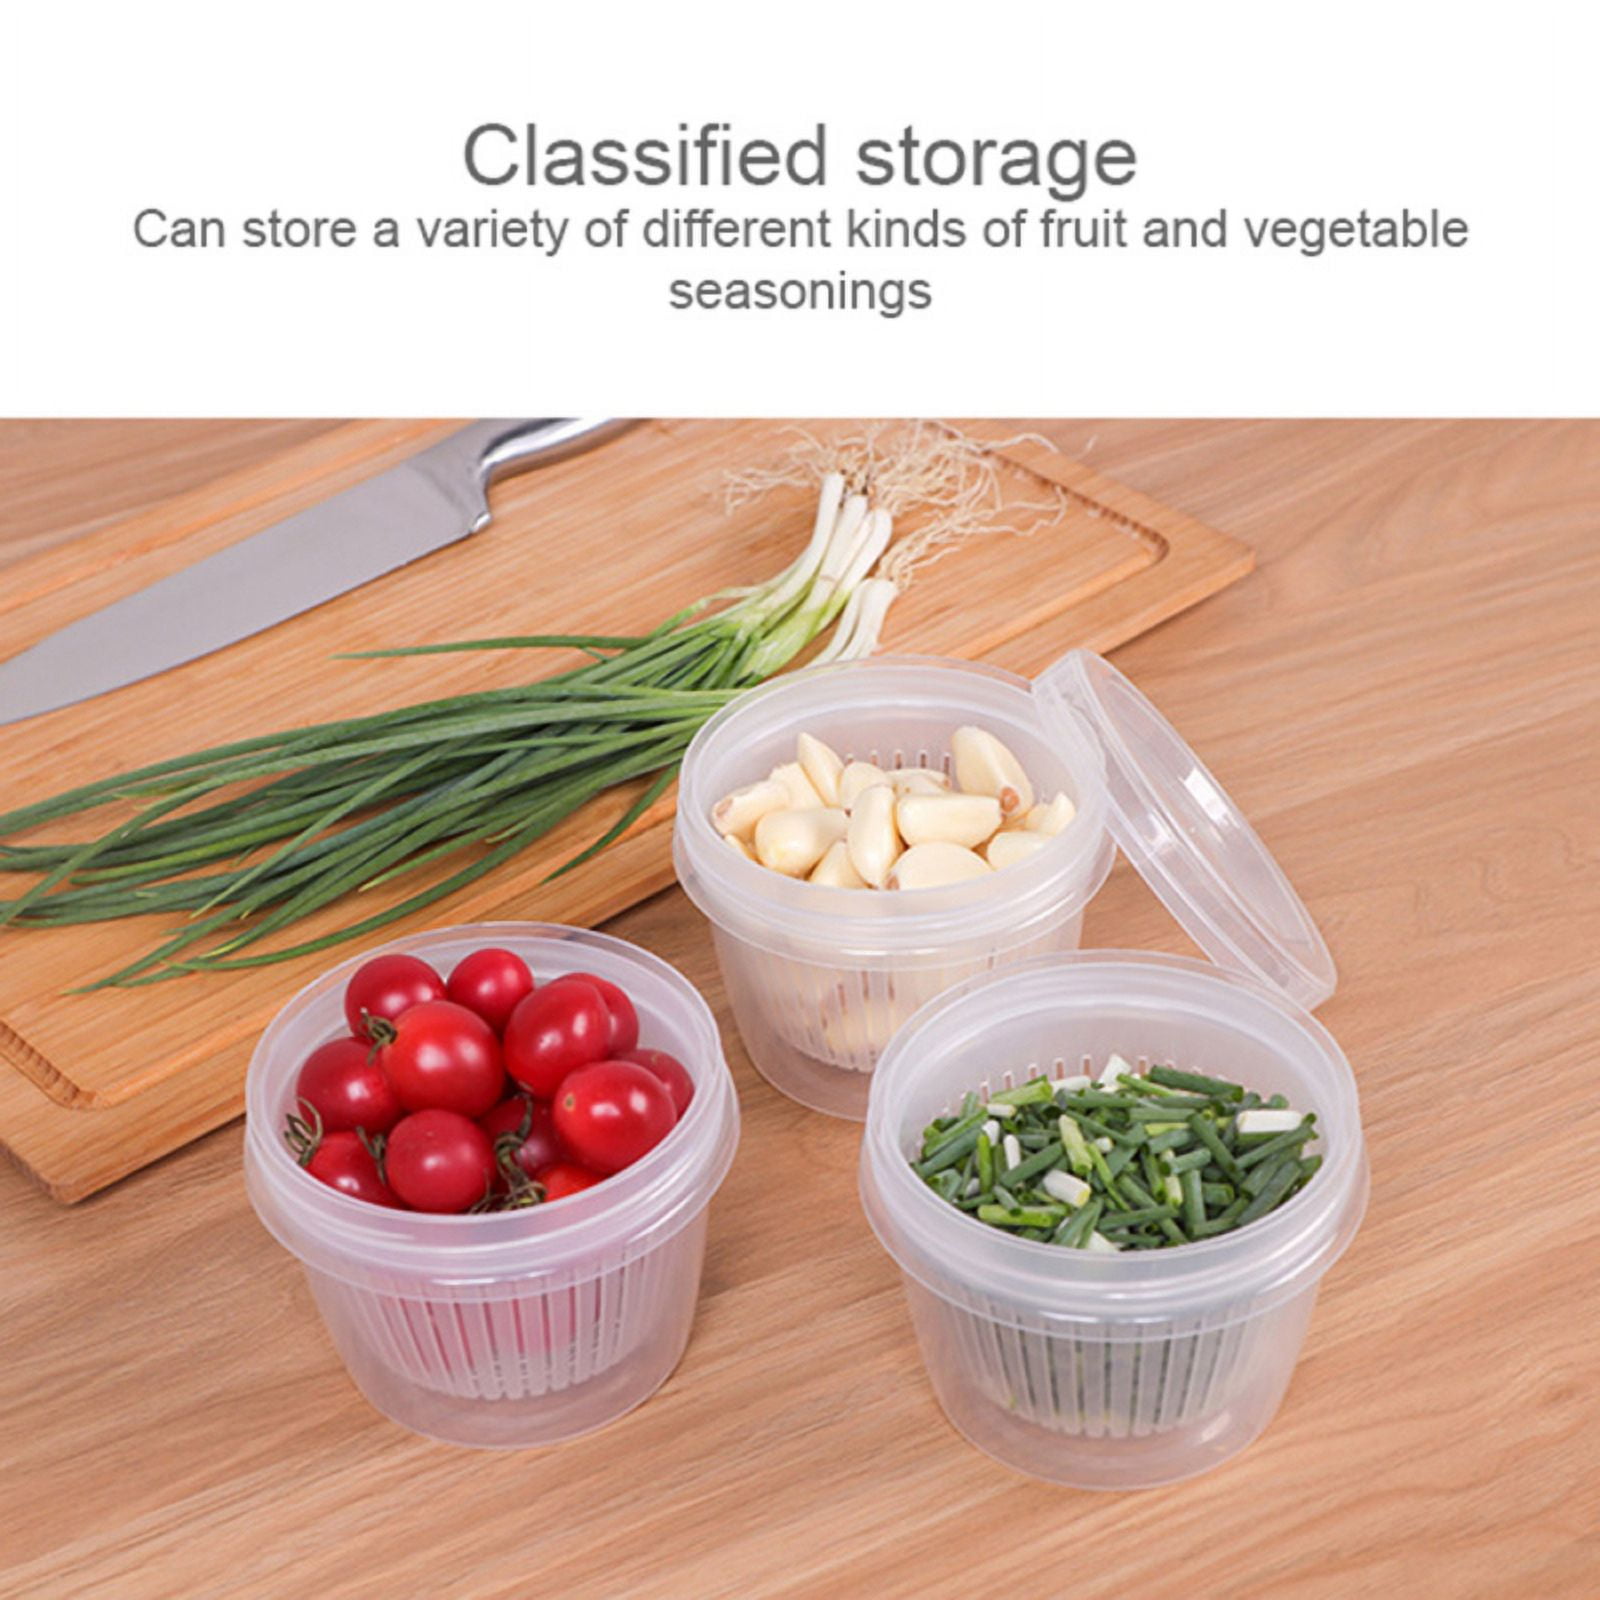 Large Vented Storage Produce Containers - Food Grade